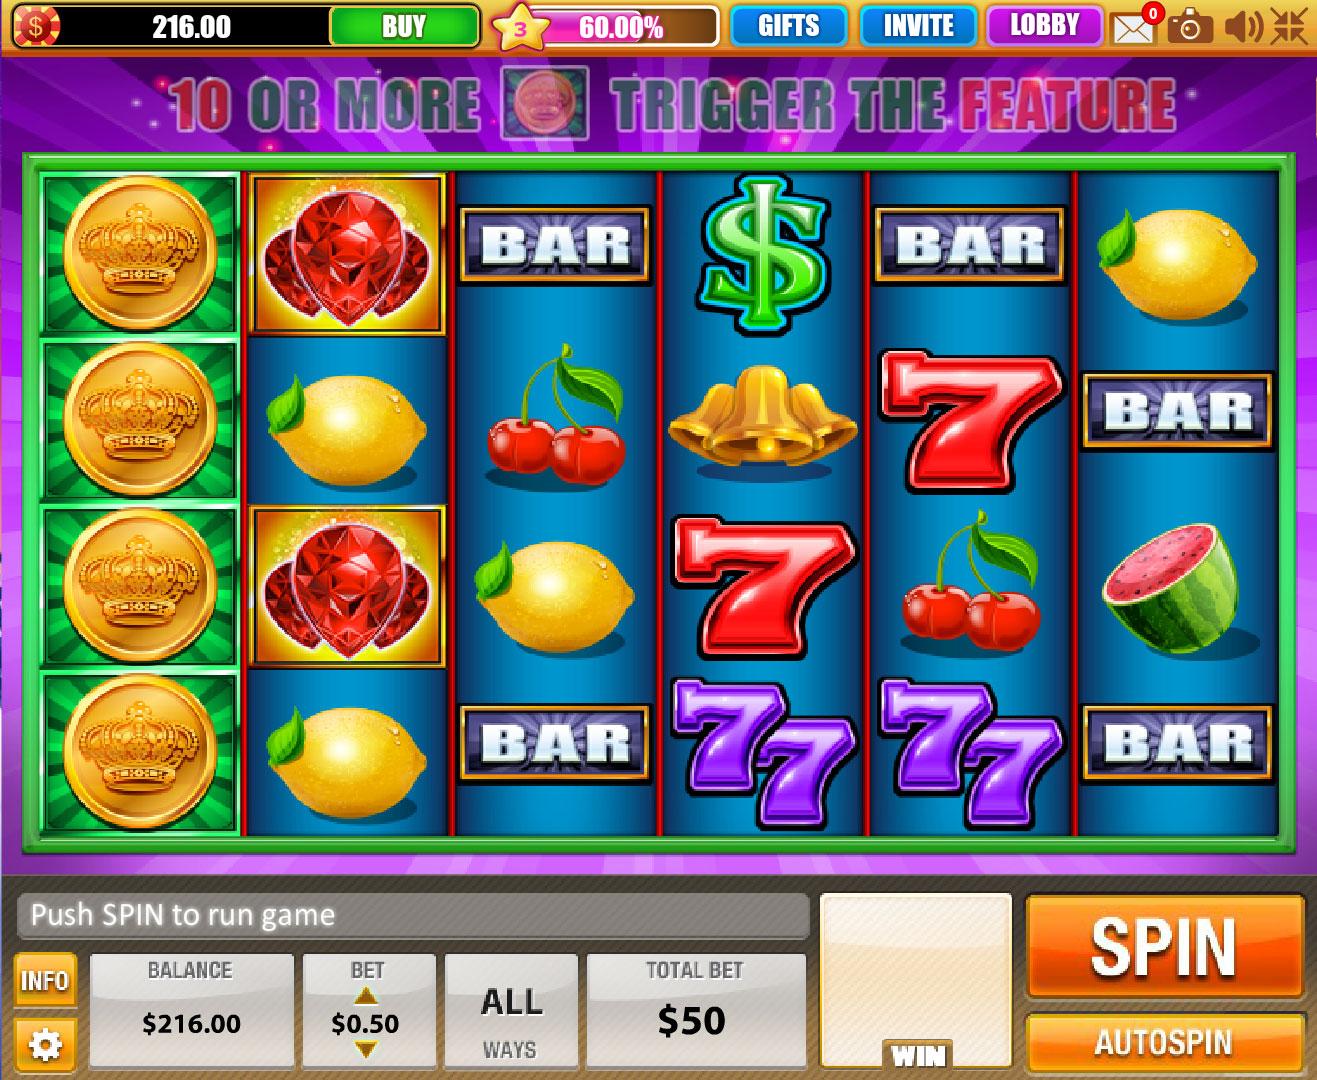 Play free slots games for fun